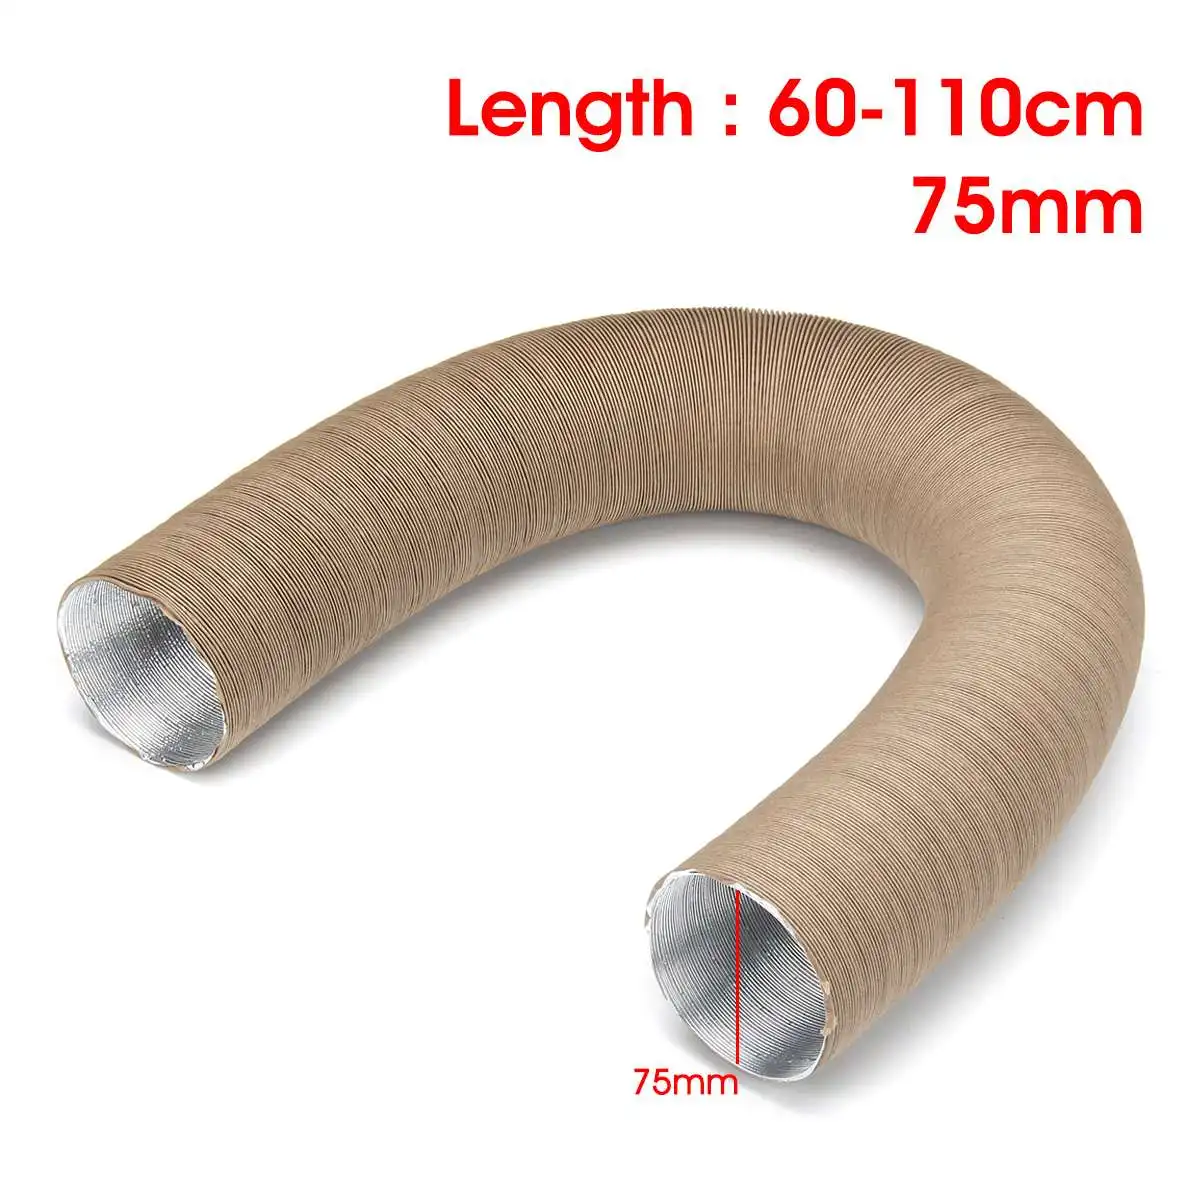 42/60/75mm Car Air Heater Ducting Pipe Hose Line Heater Tube for Diesel Parking Heaters For Webasto/Dometic/Planer - Color: 8